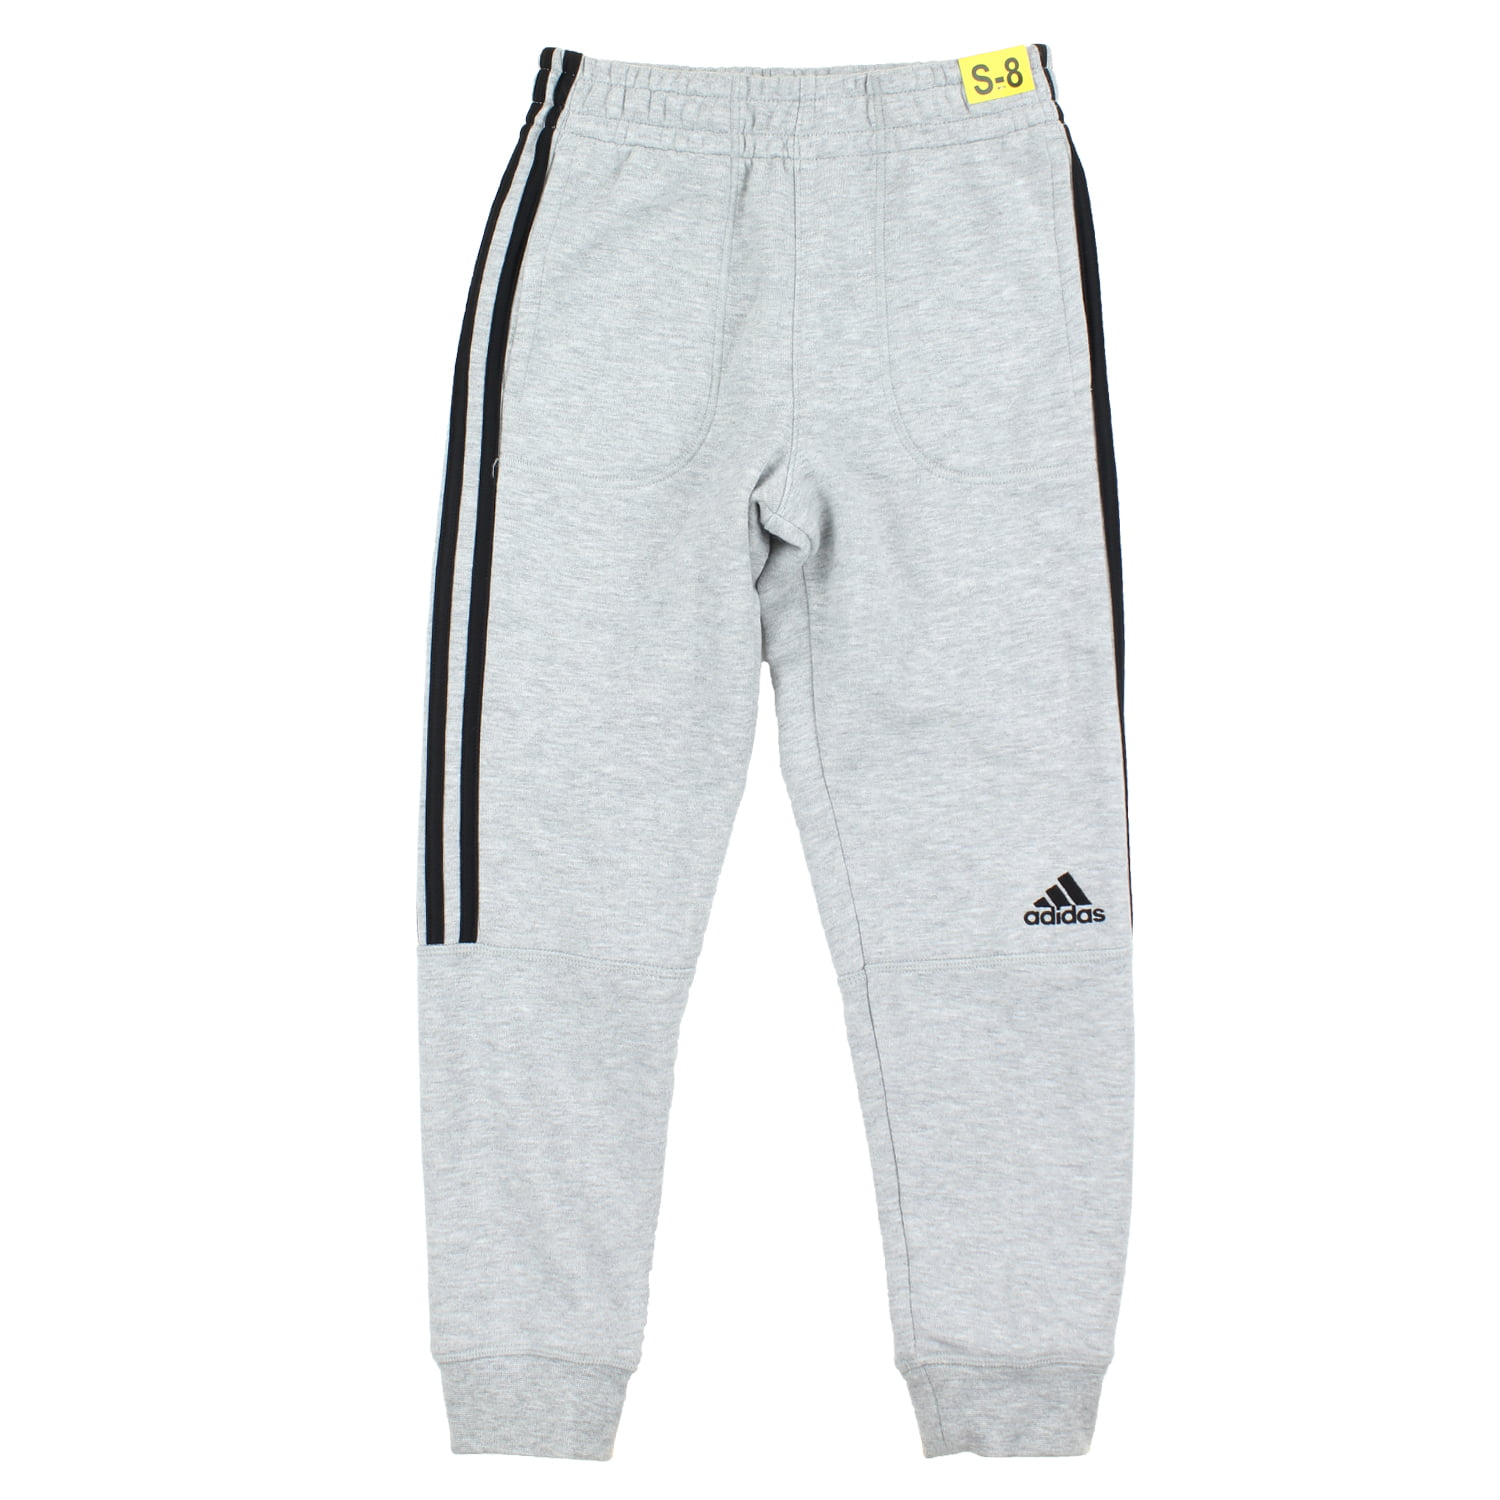 adidas french terry jogger